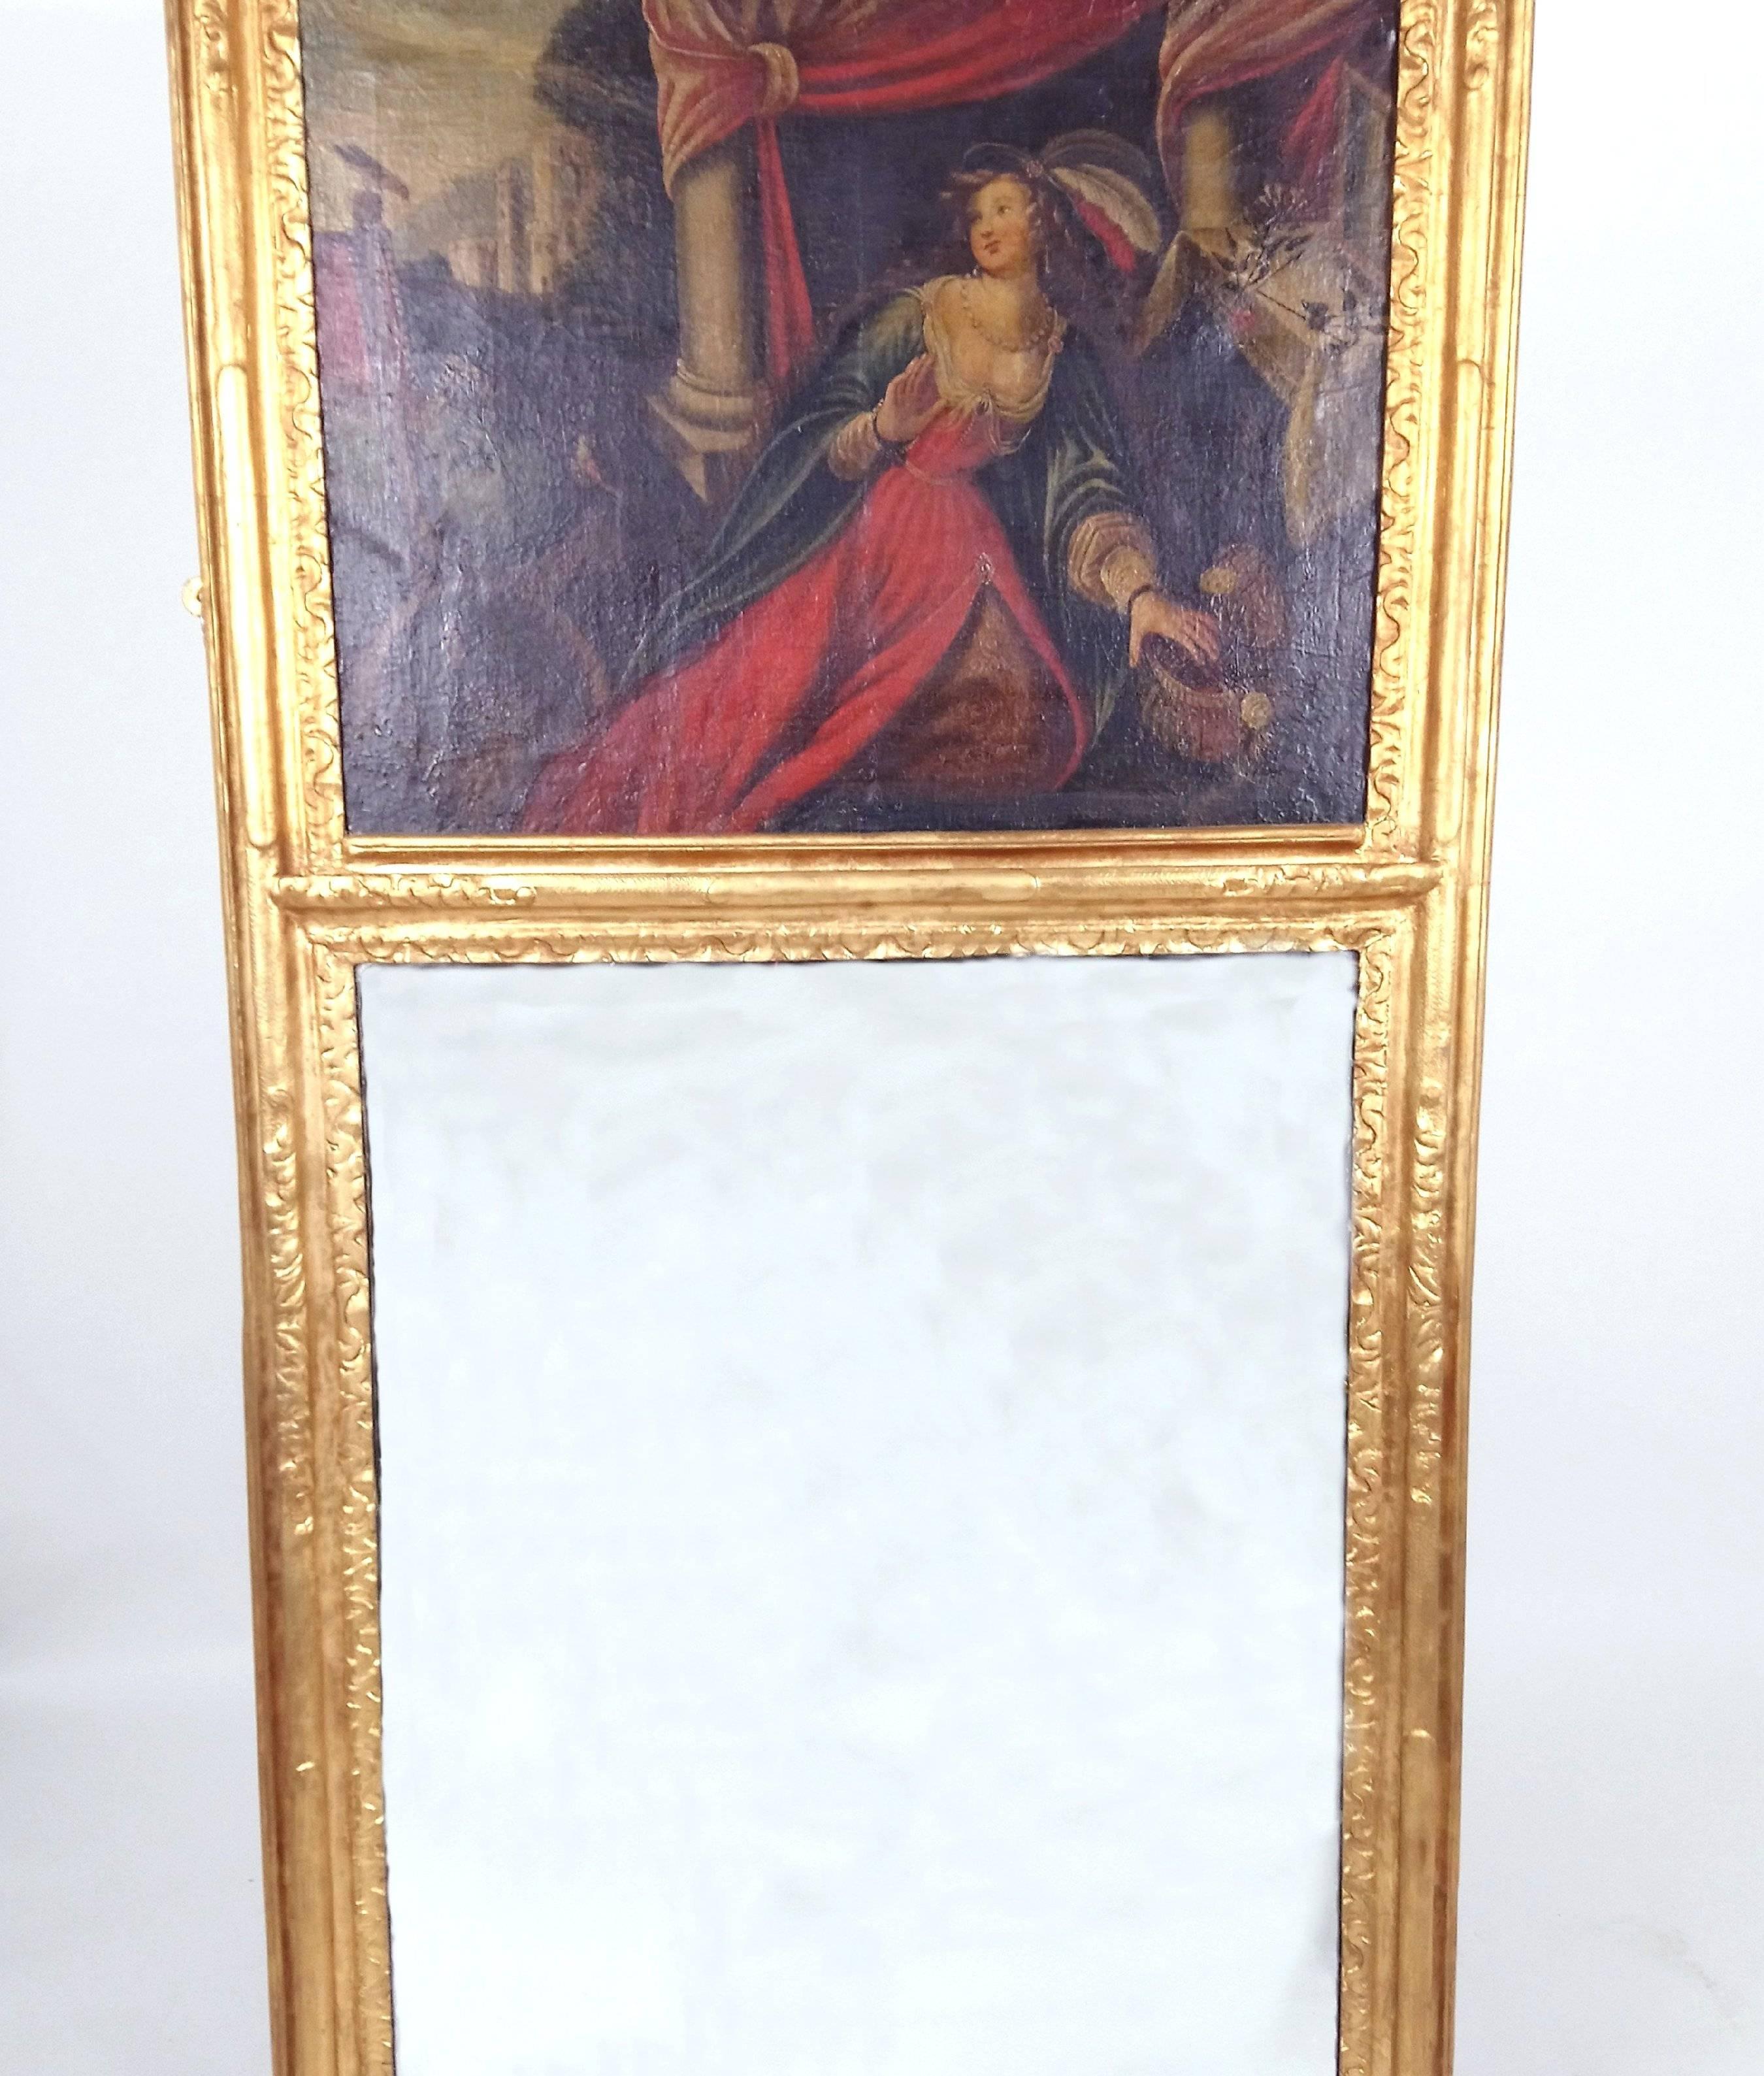 This late 18th century French giltwood wall mirror depicts a young woman of the period captured in a reclined poise, with her attention focused offside. The mirror measures 69 ½ in – 176.5 cm in height by 31 ½ - 80 cm wide, with a depth of 1 ¾ in -